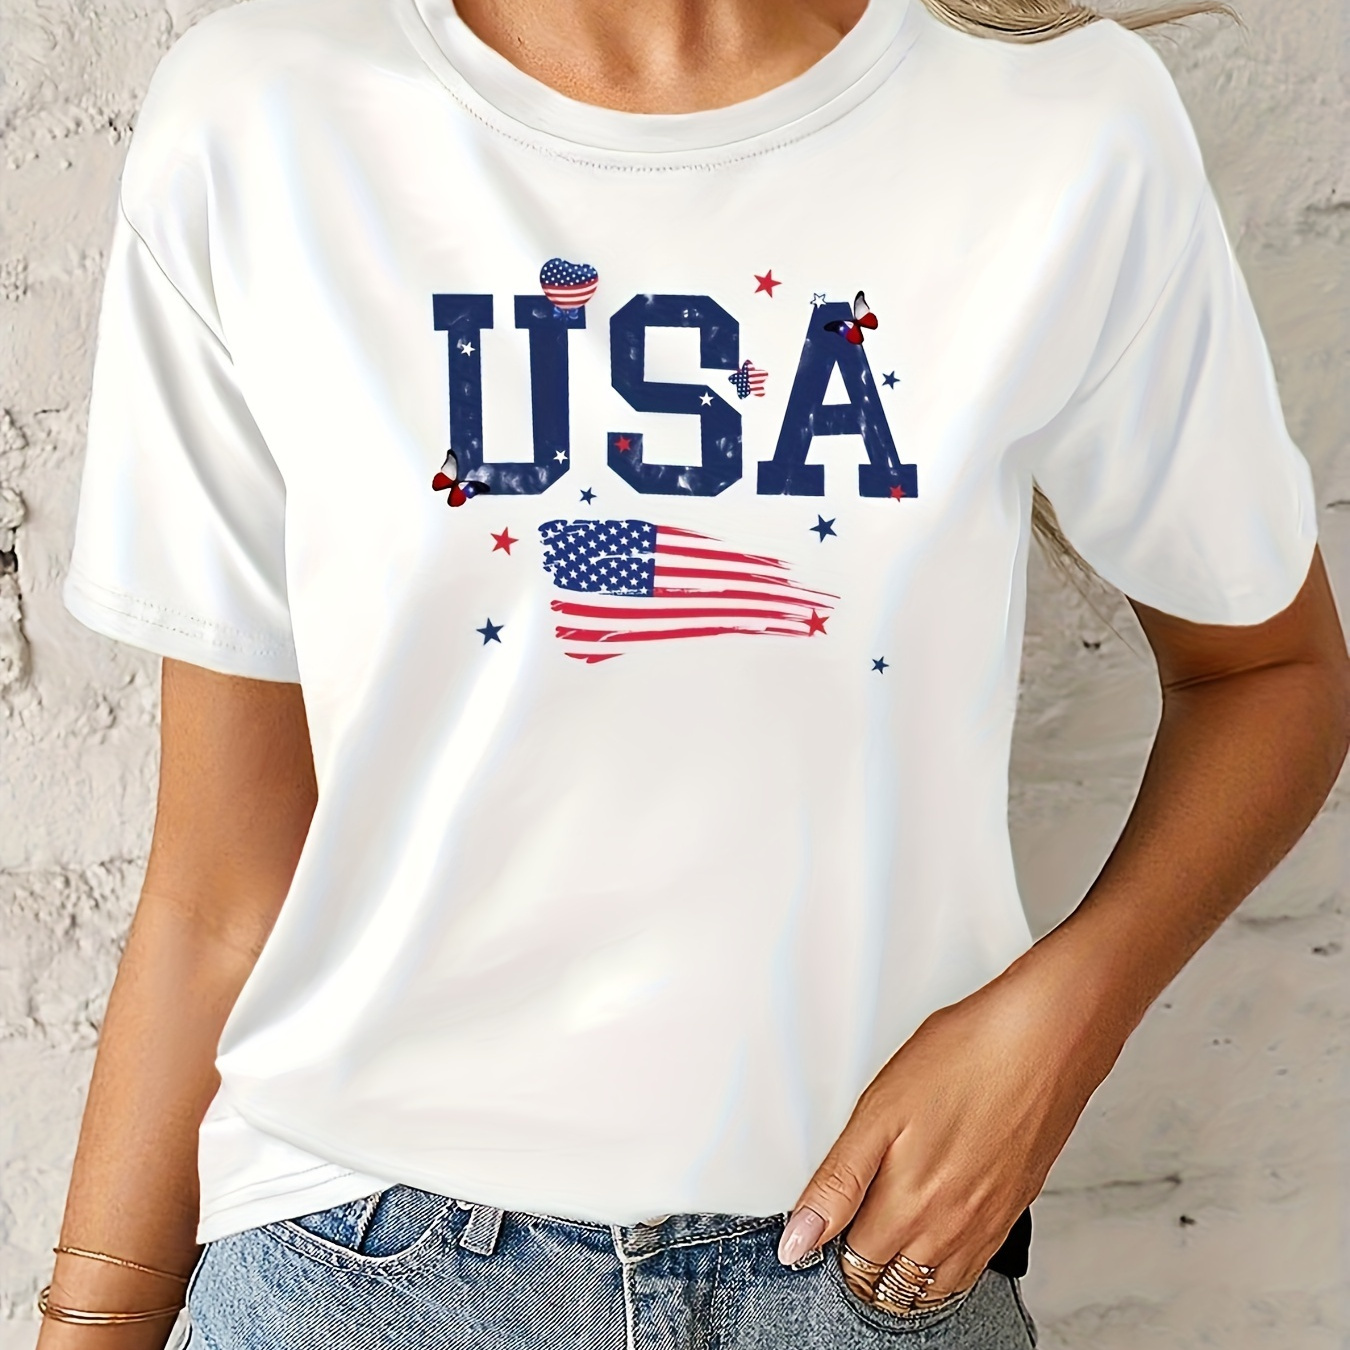 

Usa Graphic Print T-shirt, Short Sleeve Crew Neck Casual Top For Summer & Spring, Women's Clothing